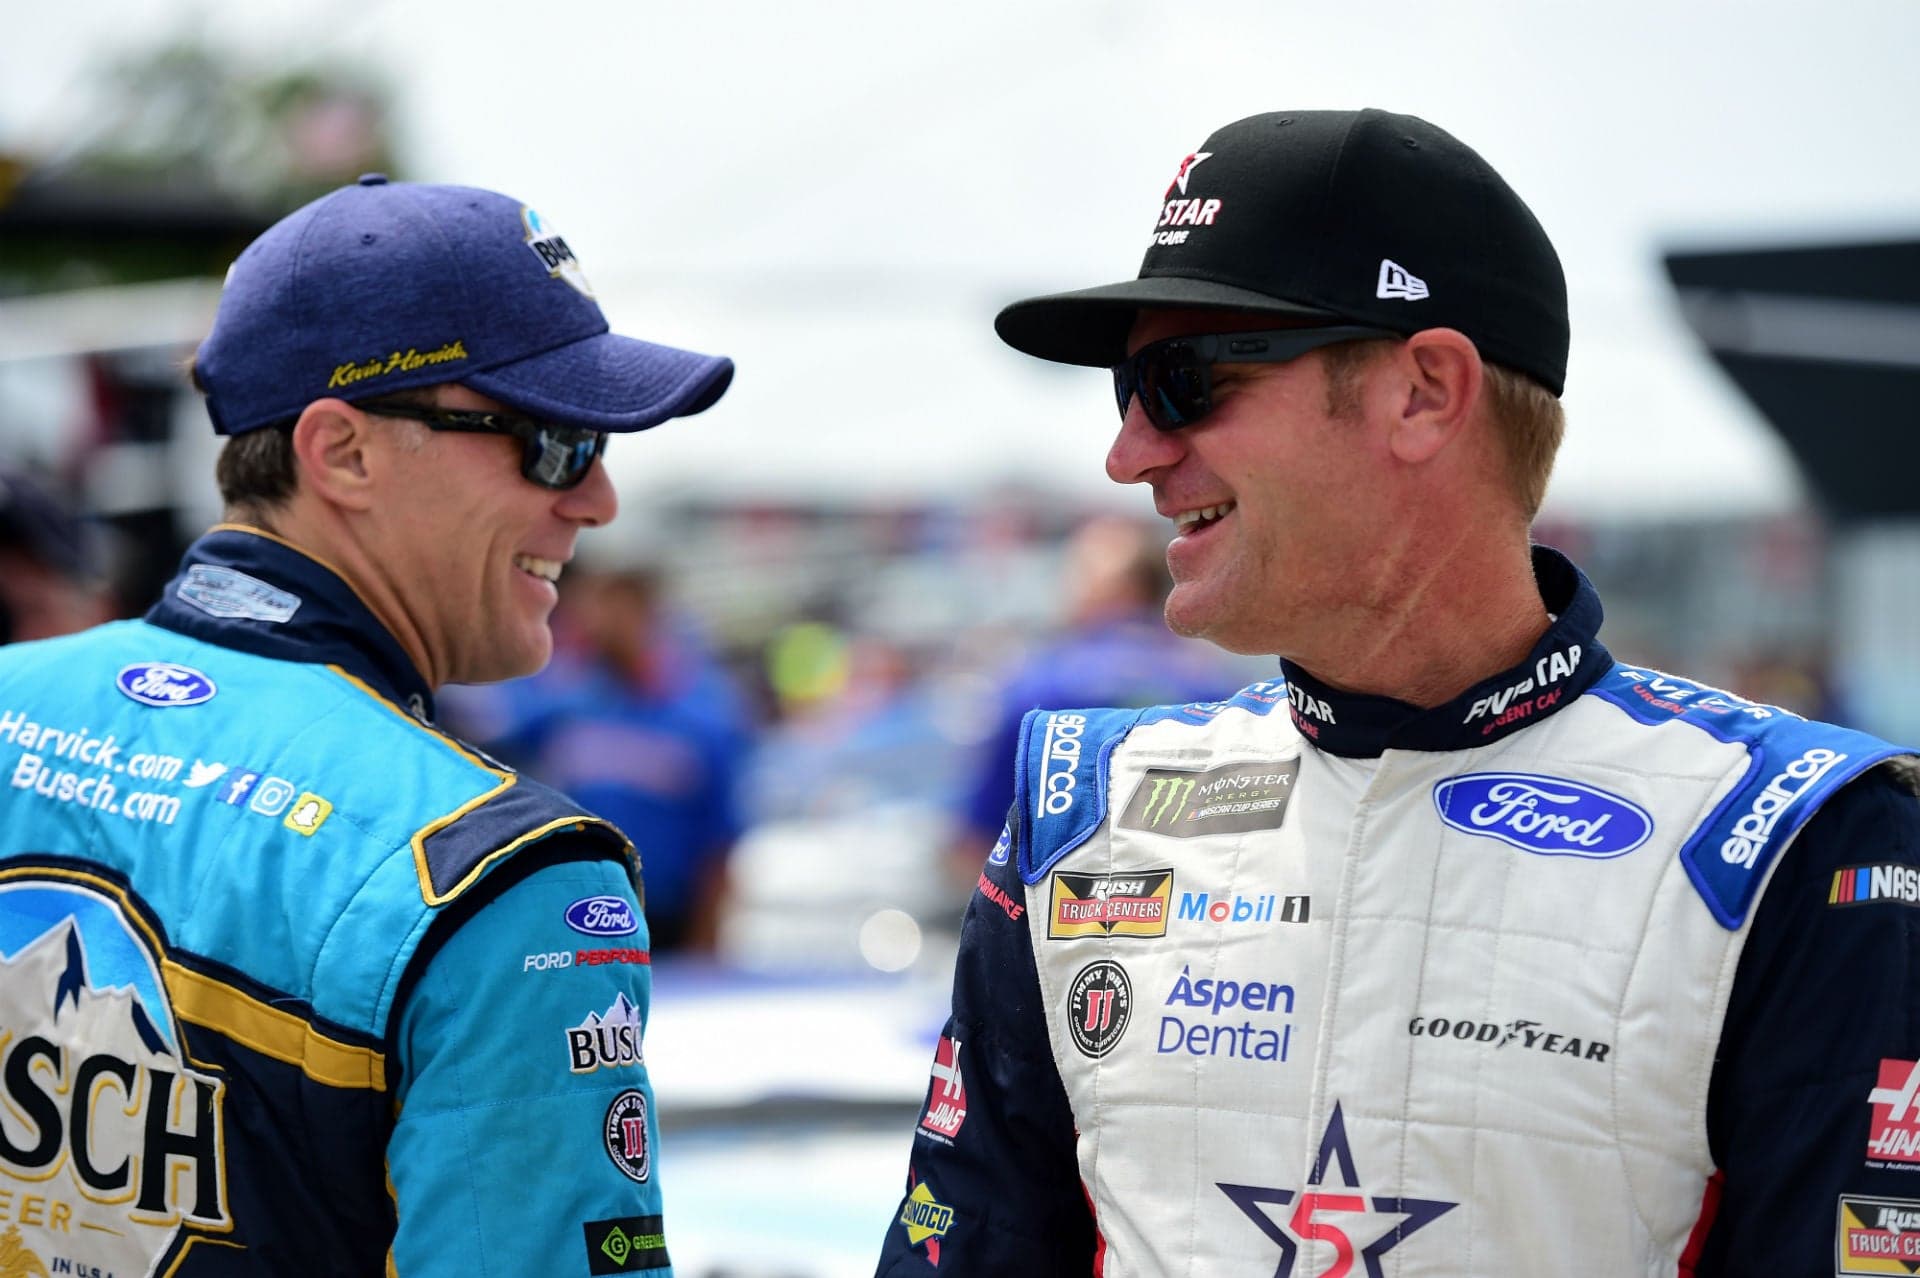 NASCAR’s Clint Bowyer Says F1 Cars Are Way Too Complicated For Him